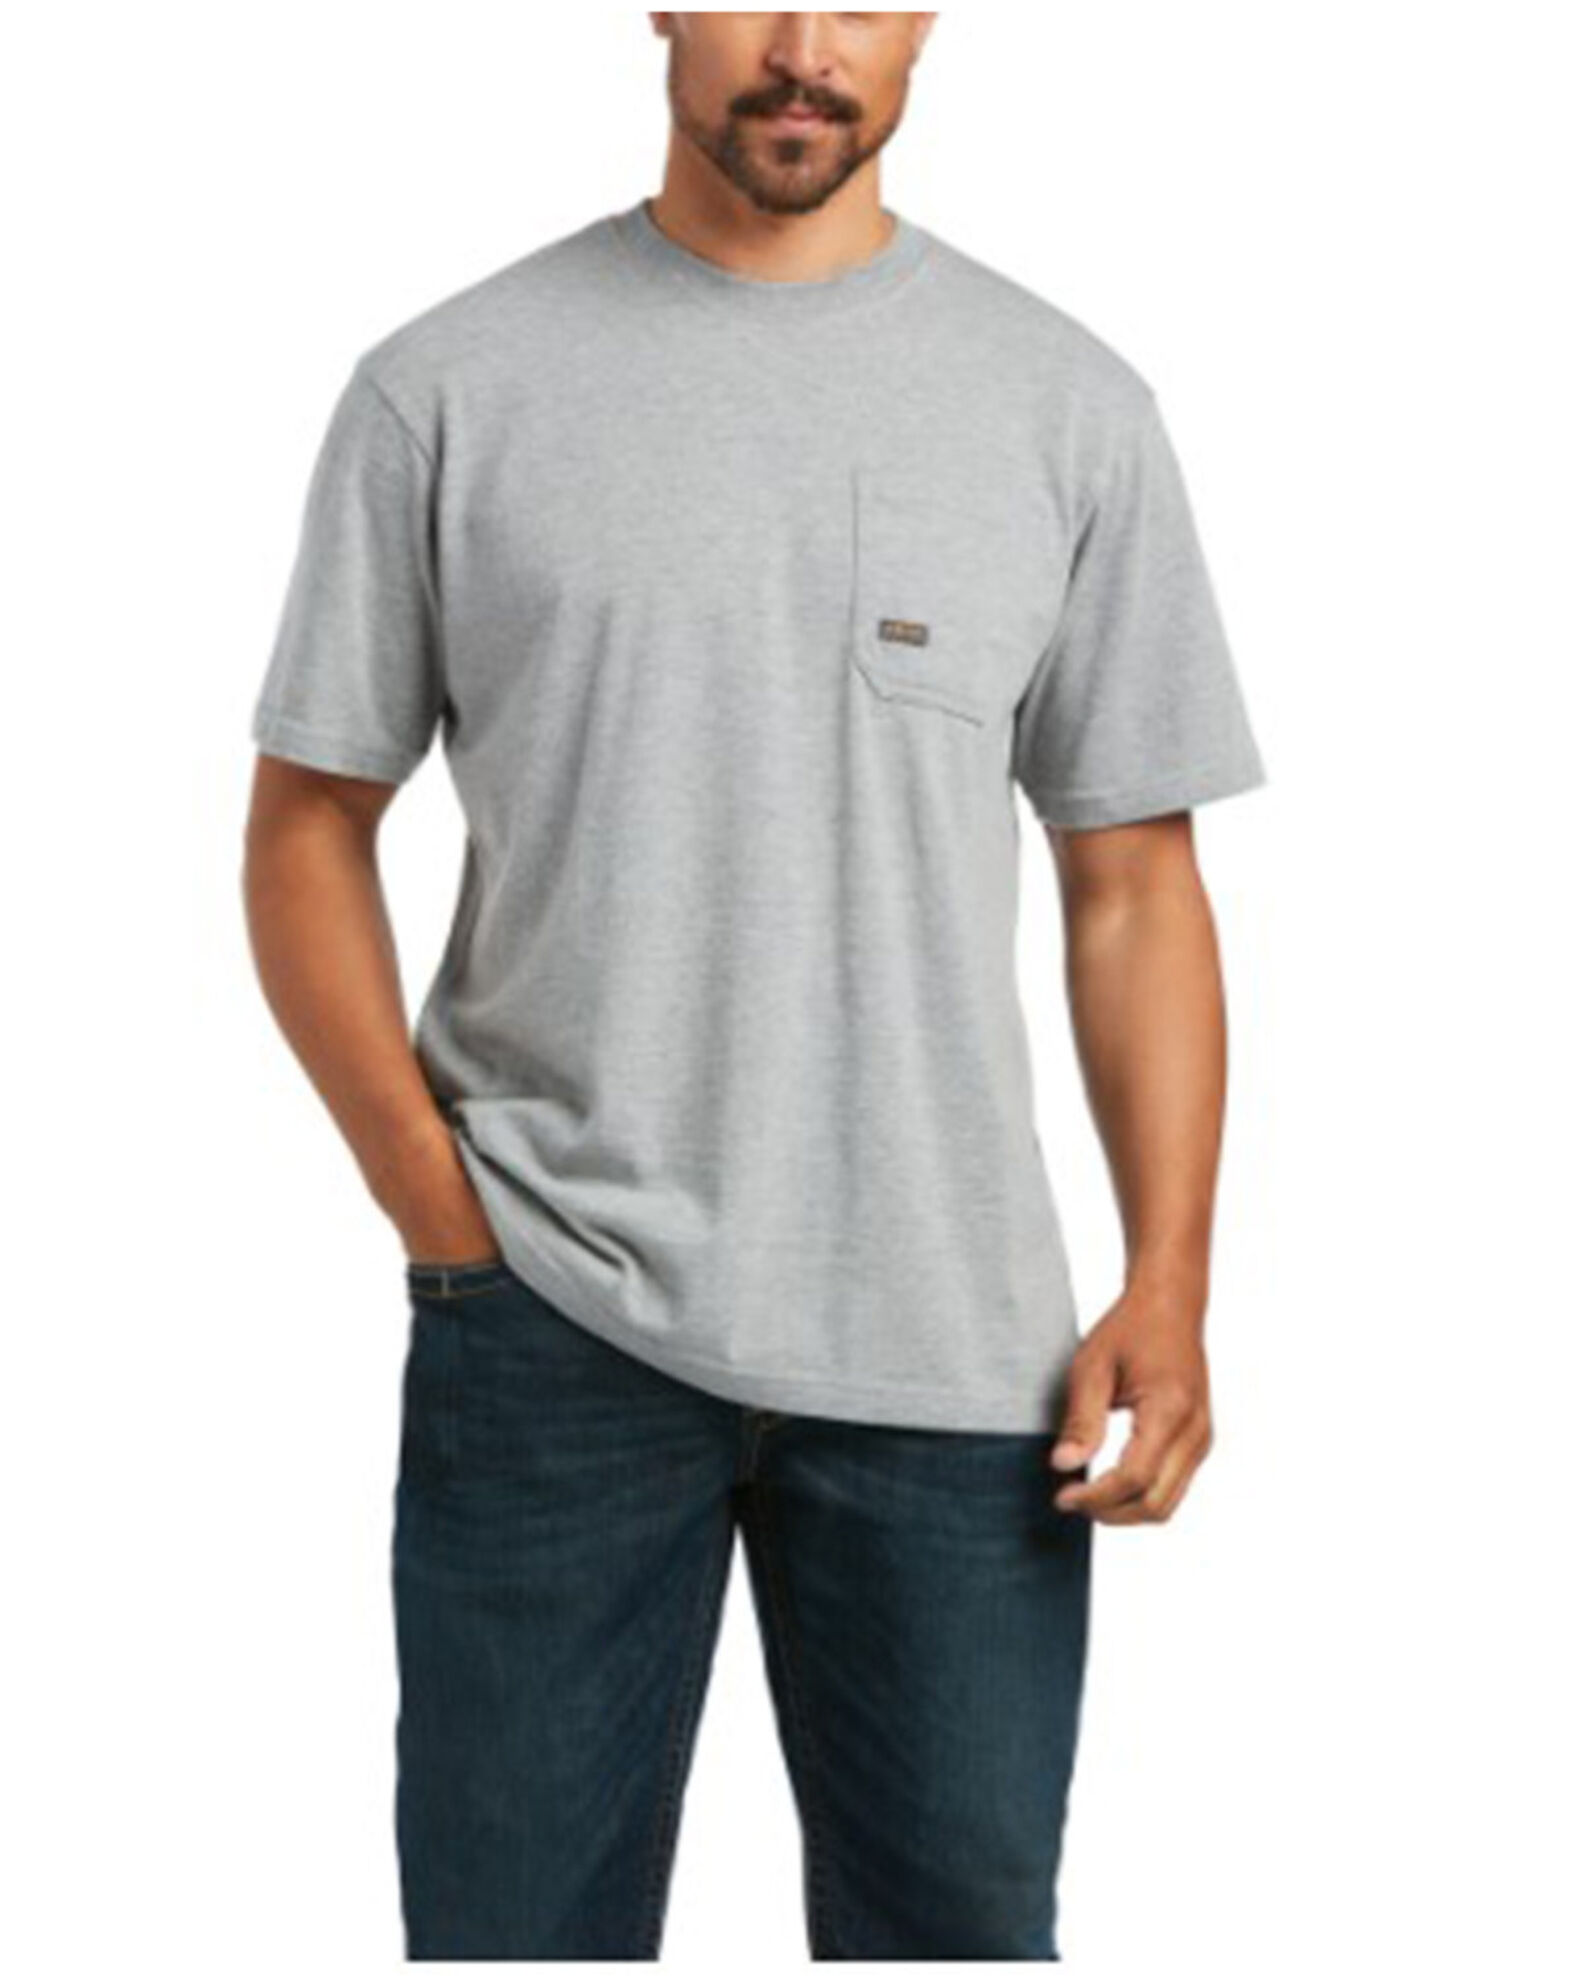 Cleveland Short Sleeve Graphic T-Shirt - Dickies US